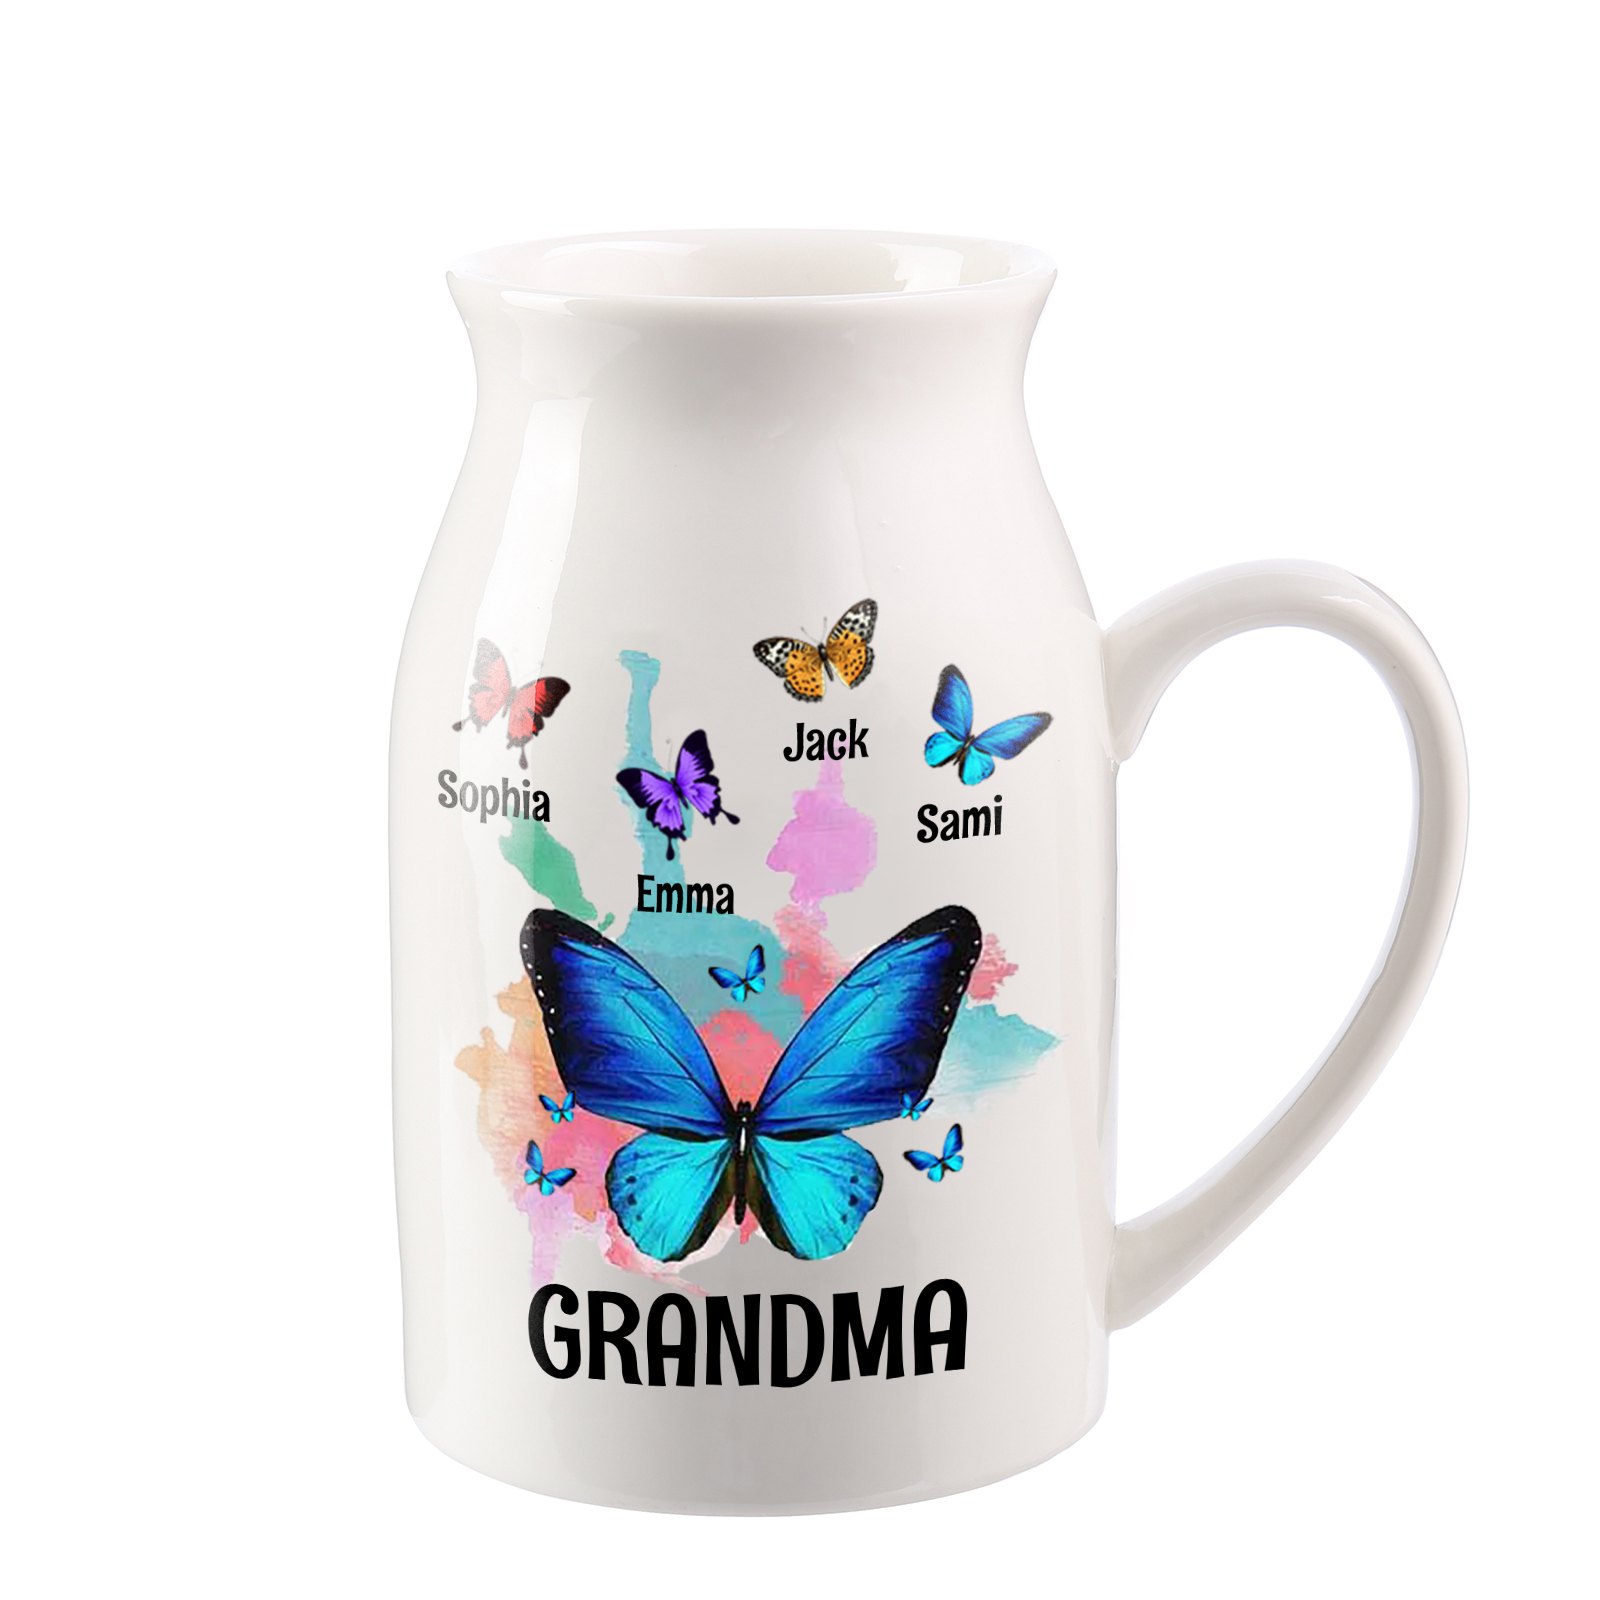 4 Names - Personalized Beautiful Colorful Butterfly Style Ceramic Vase